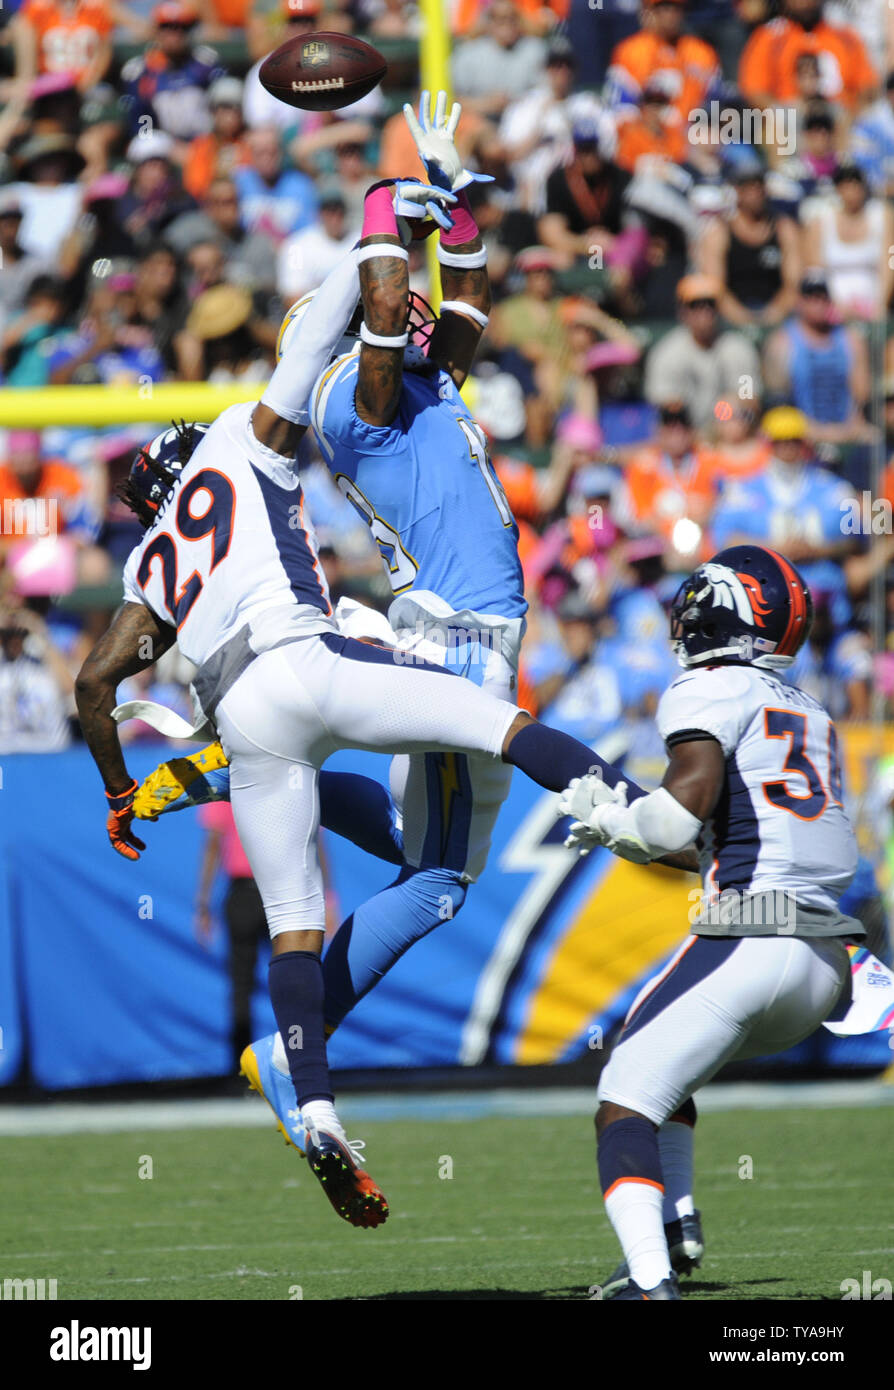 Denver Broncos Bradley Roby breaks up a pass intended for Los Angeles Chargers Keenan Allen in the first half at the StubHub Center in Carson, California on October 22, 2017. Photo by Lori Shepler/UPI Stock Photo